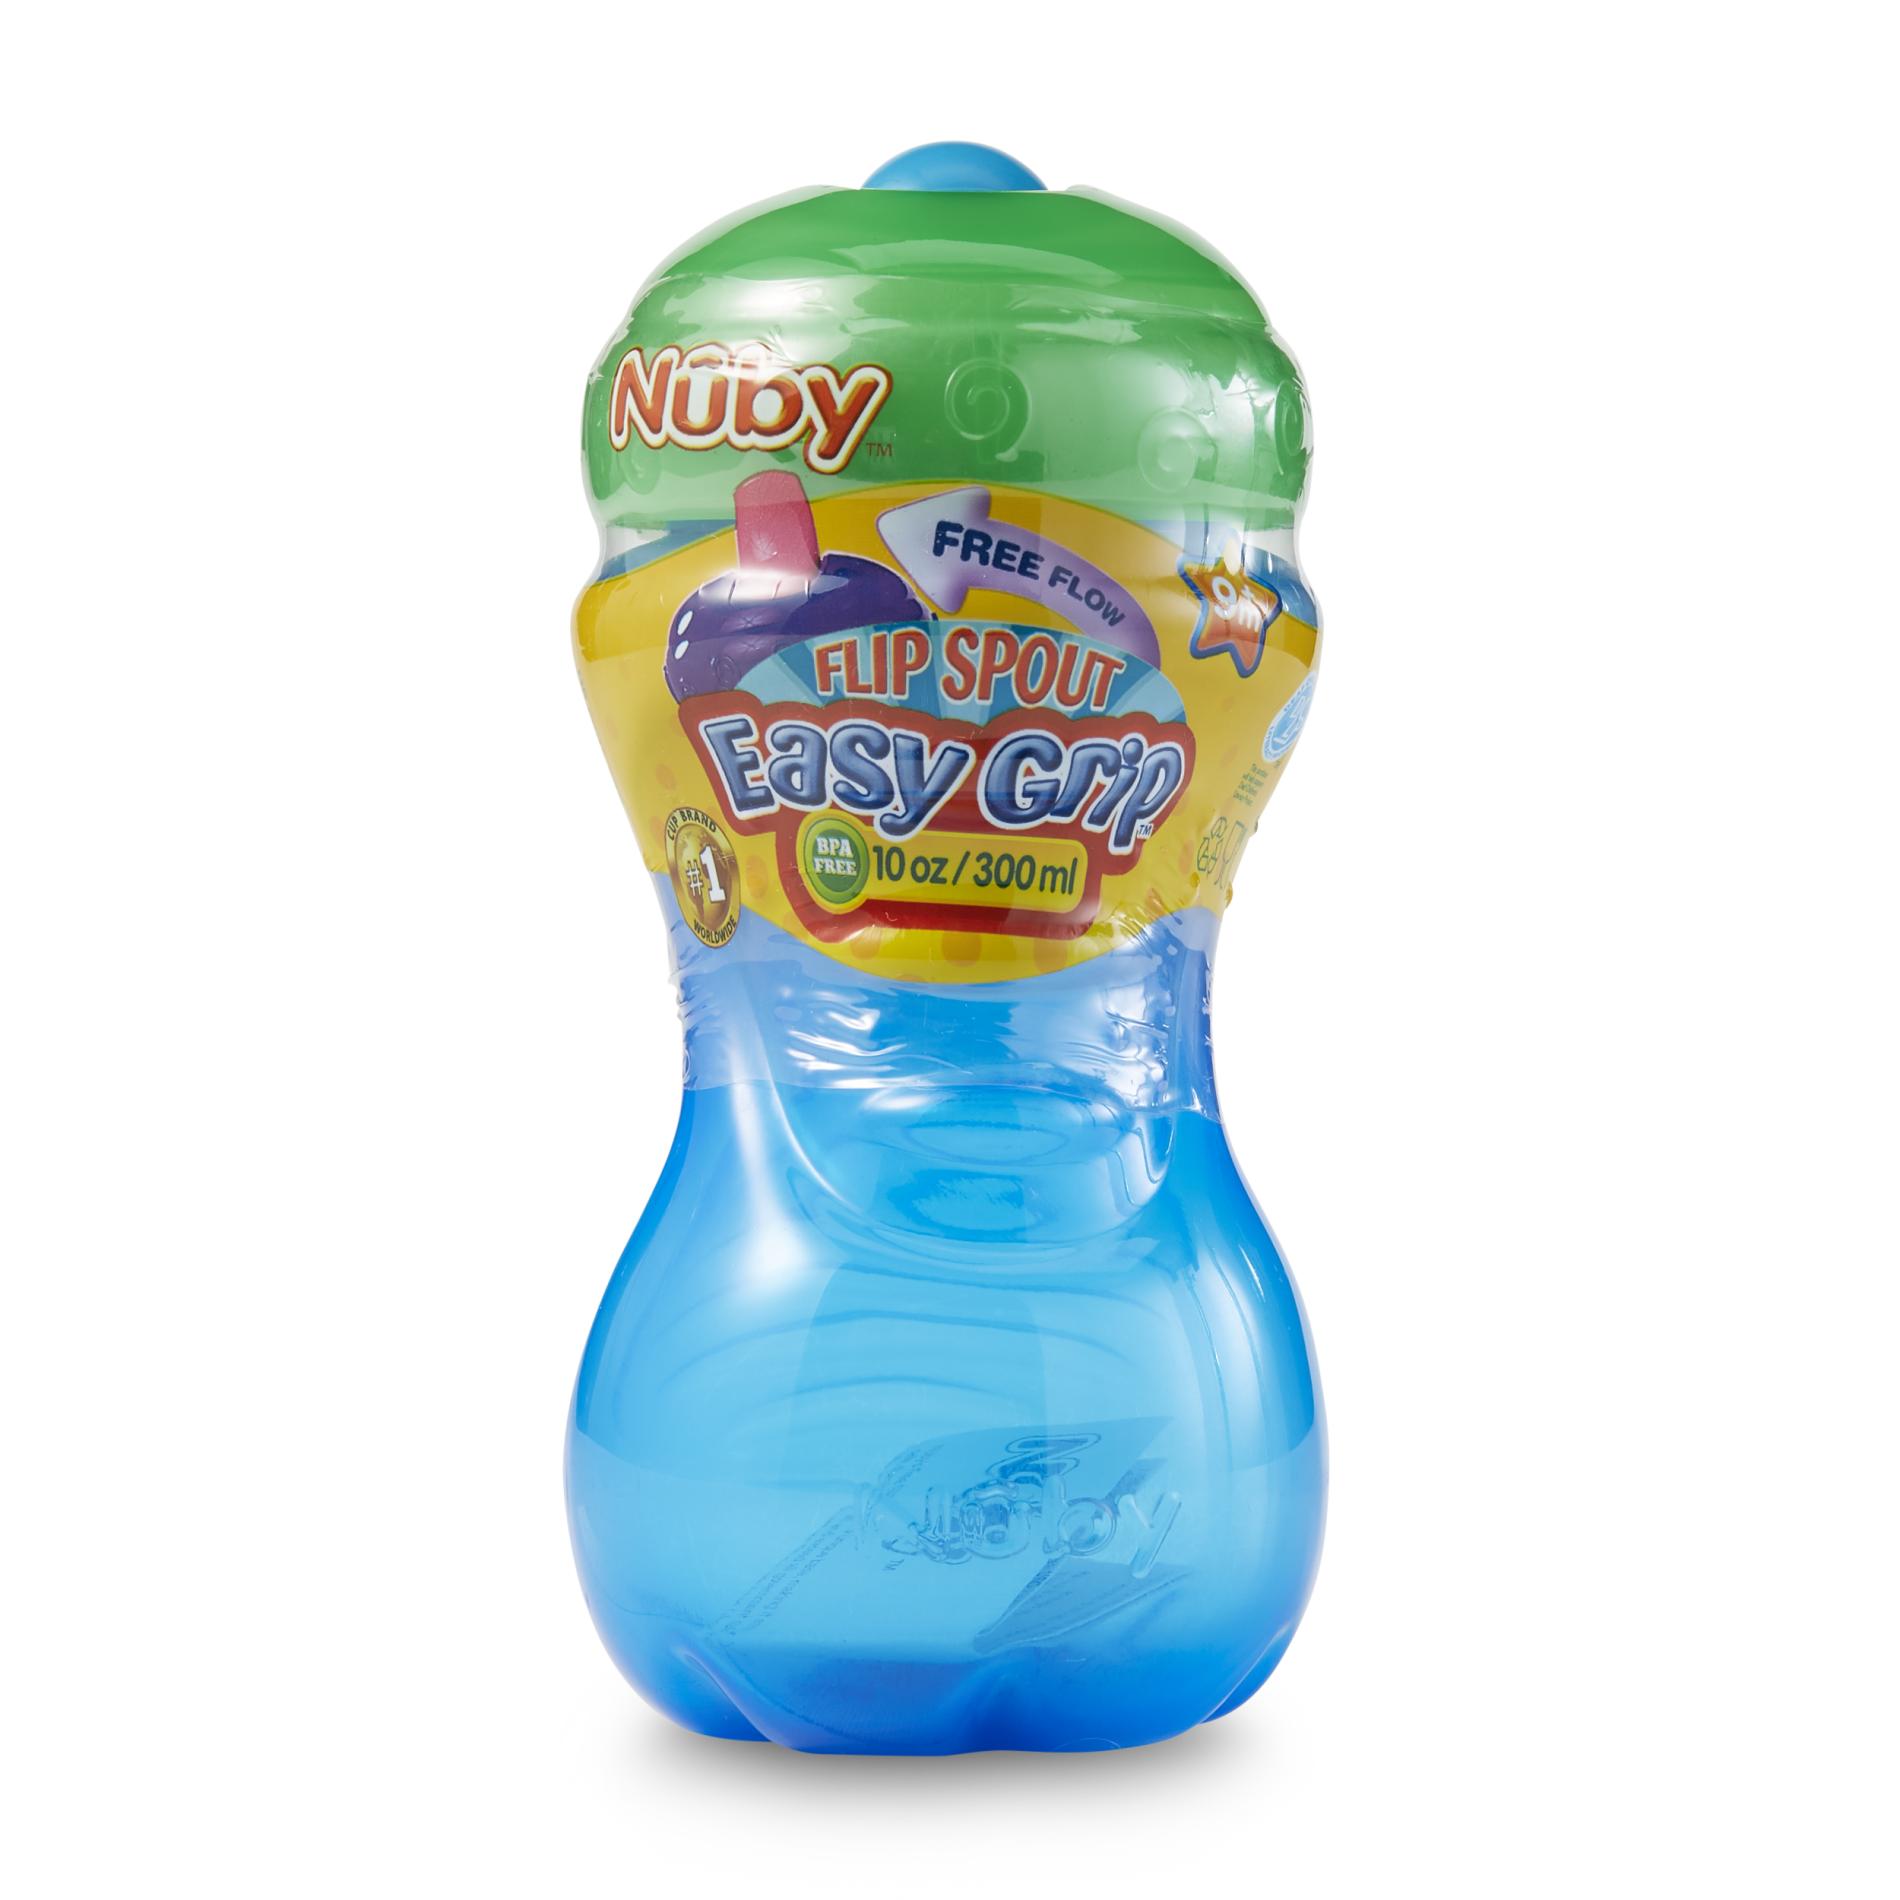 Nuby Infants' Easy Grip Training Cup